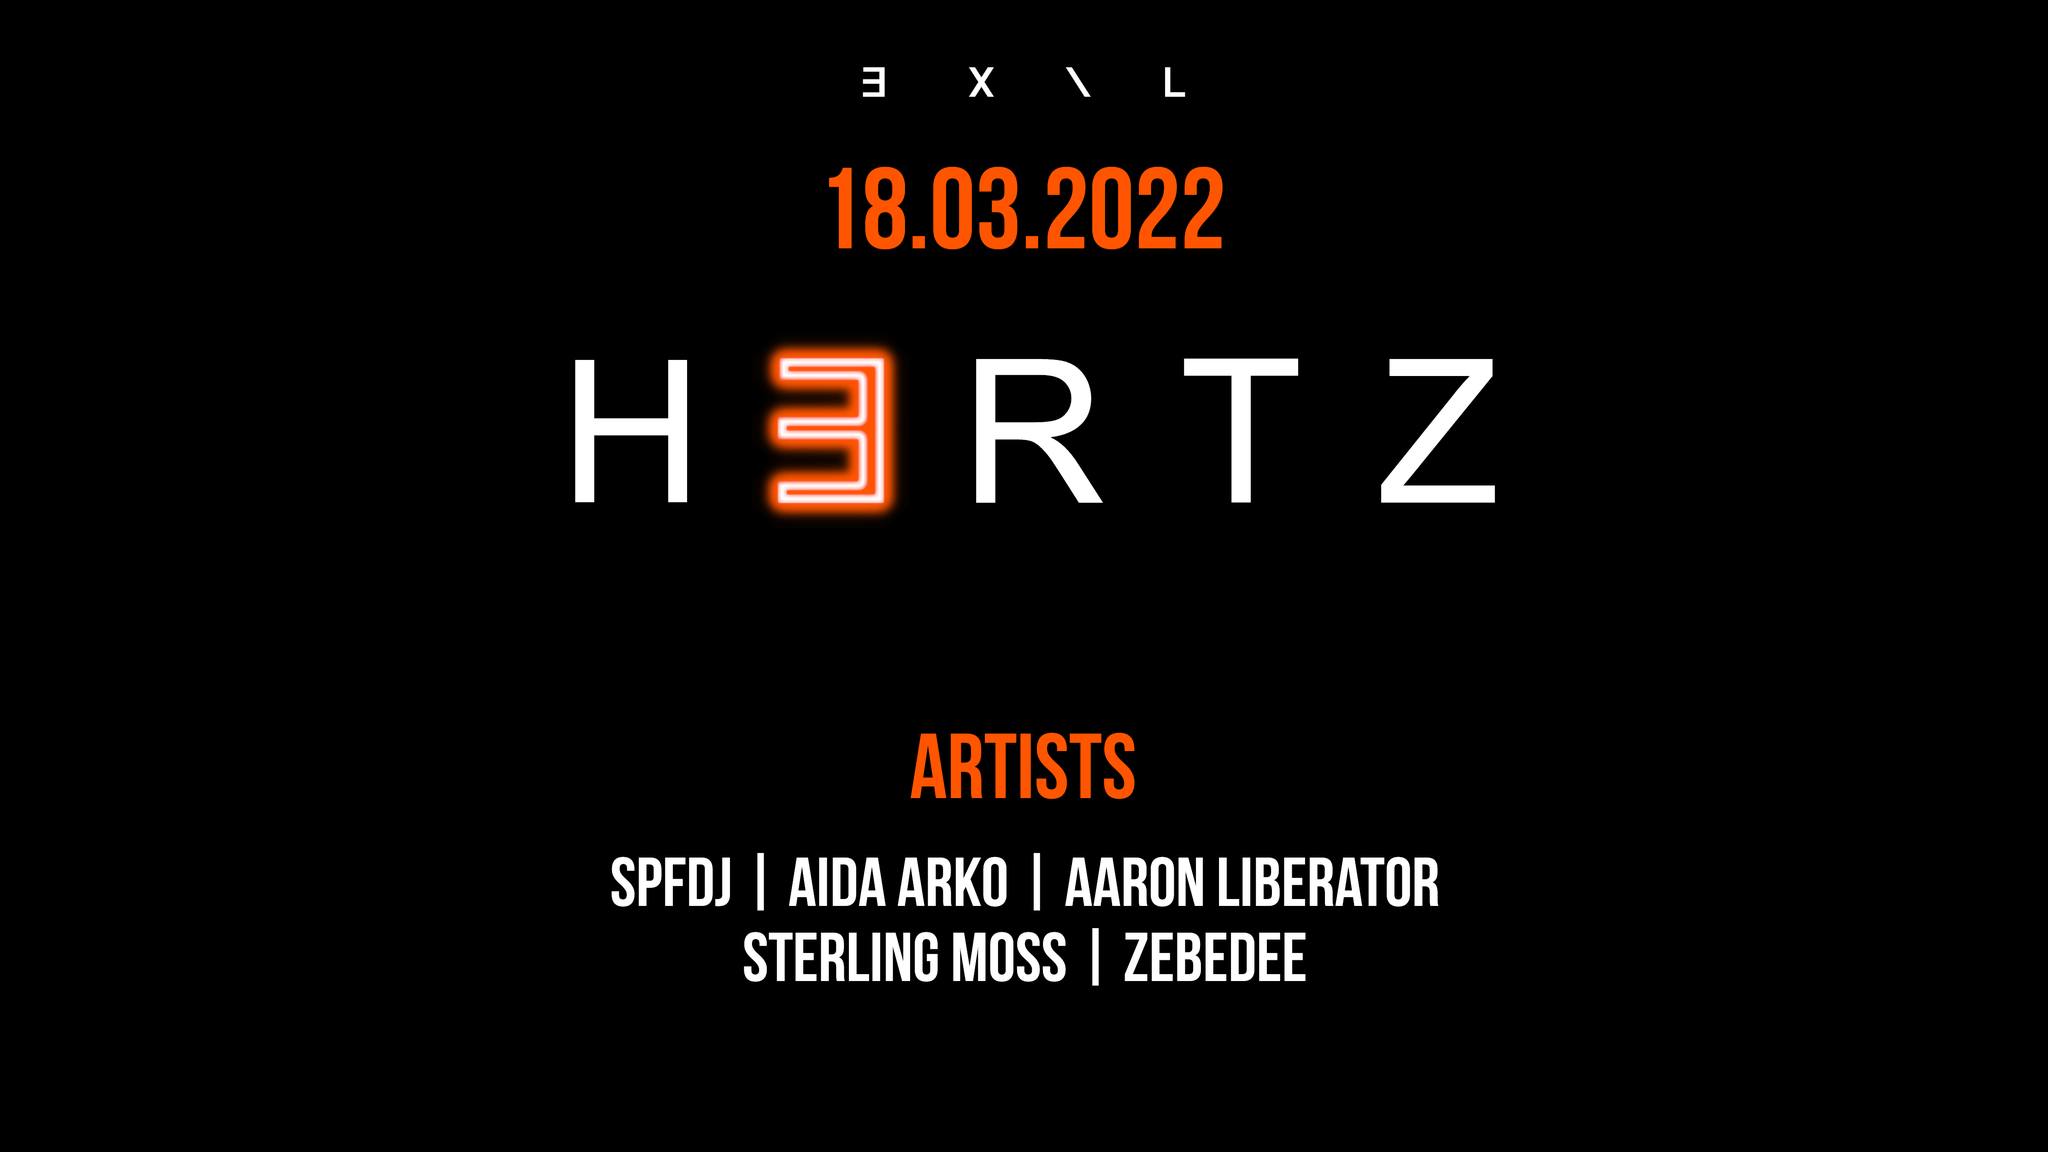 HERTZ opening am 18. March 2022 @ EXIL.